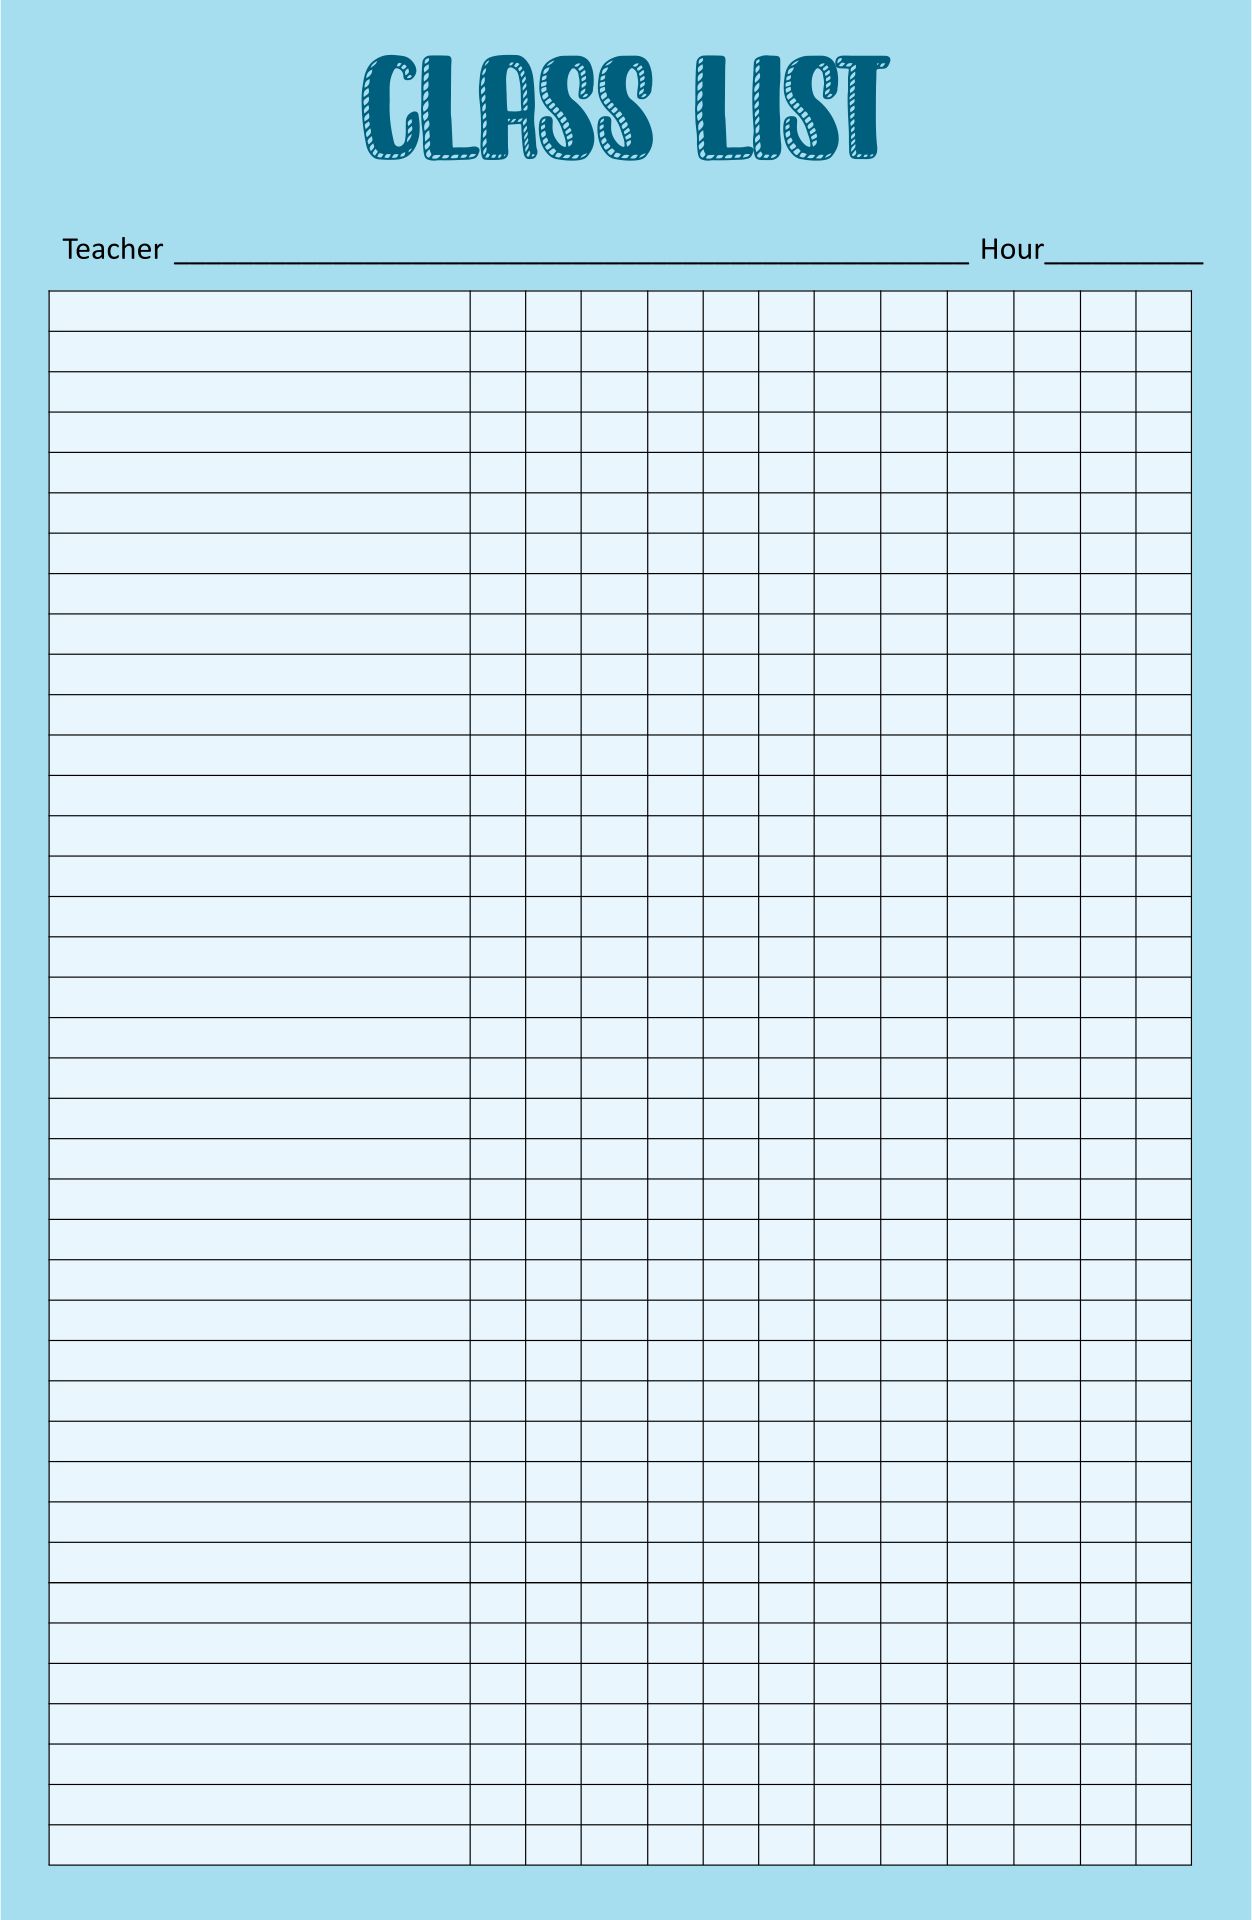 10-best-class-list-blank-printable-pdf-for-free-at-printablee